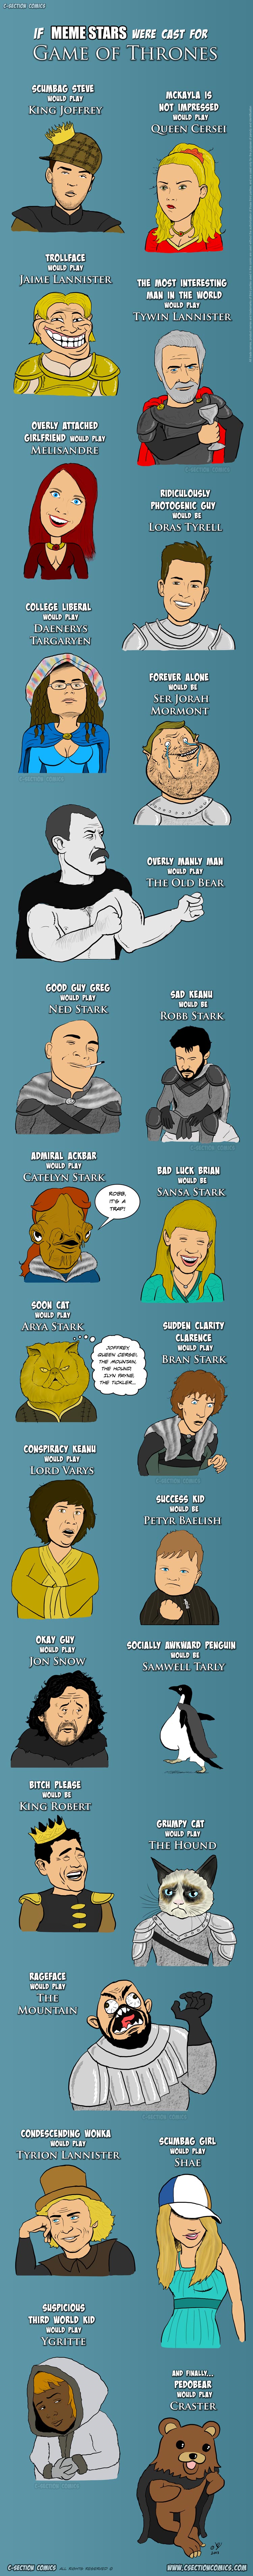 If Meme Stars Were Cast For Game of Thrones - By C-Section Comics